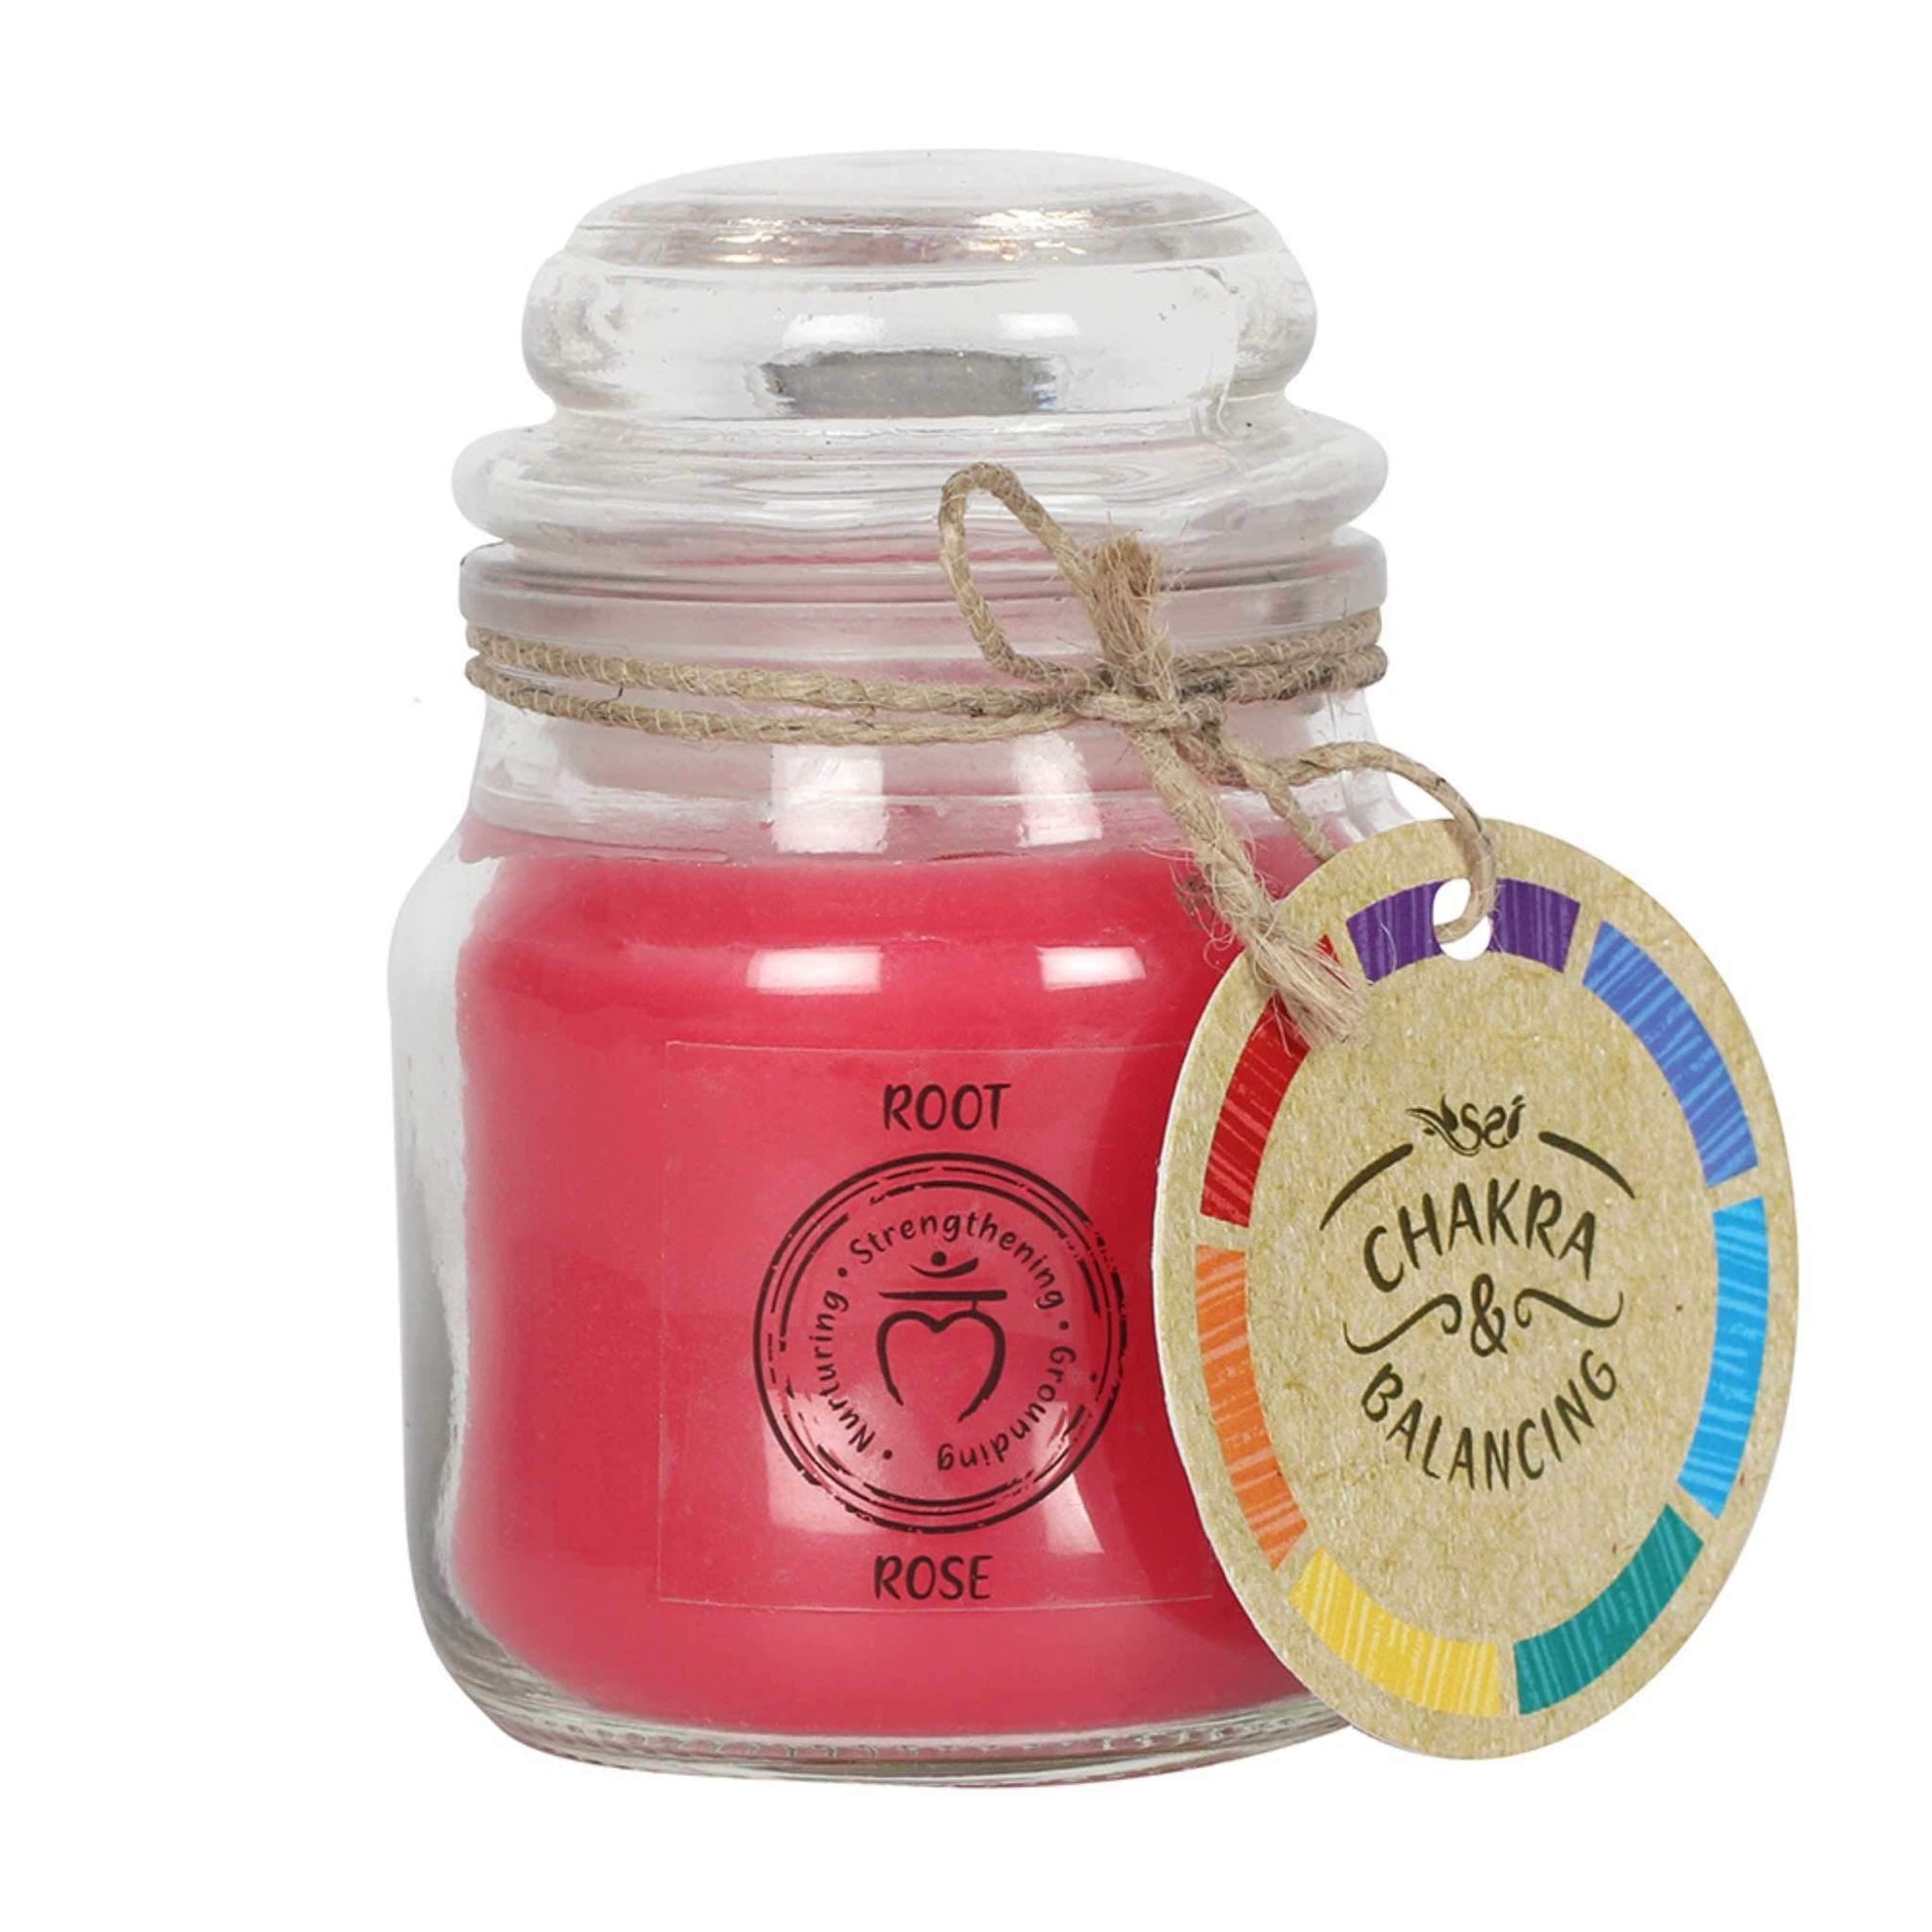 Balancing Chakra Candle in a min glass jar with stopper. Tied with a label that says Chakra Balancing. Candle is red with a label on the jar that says Root - Rose